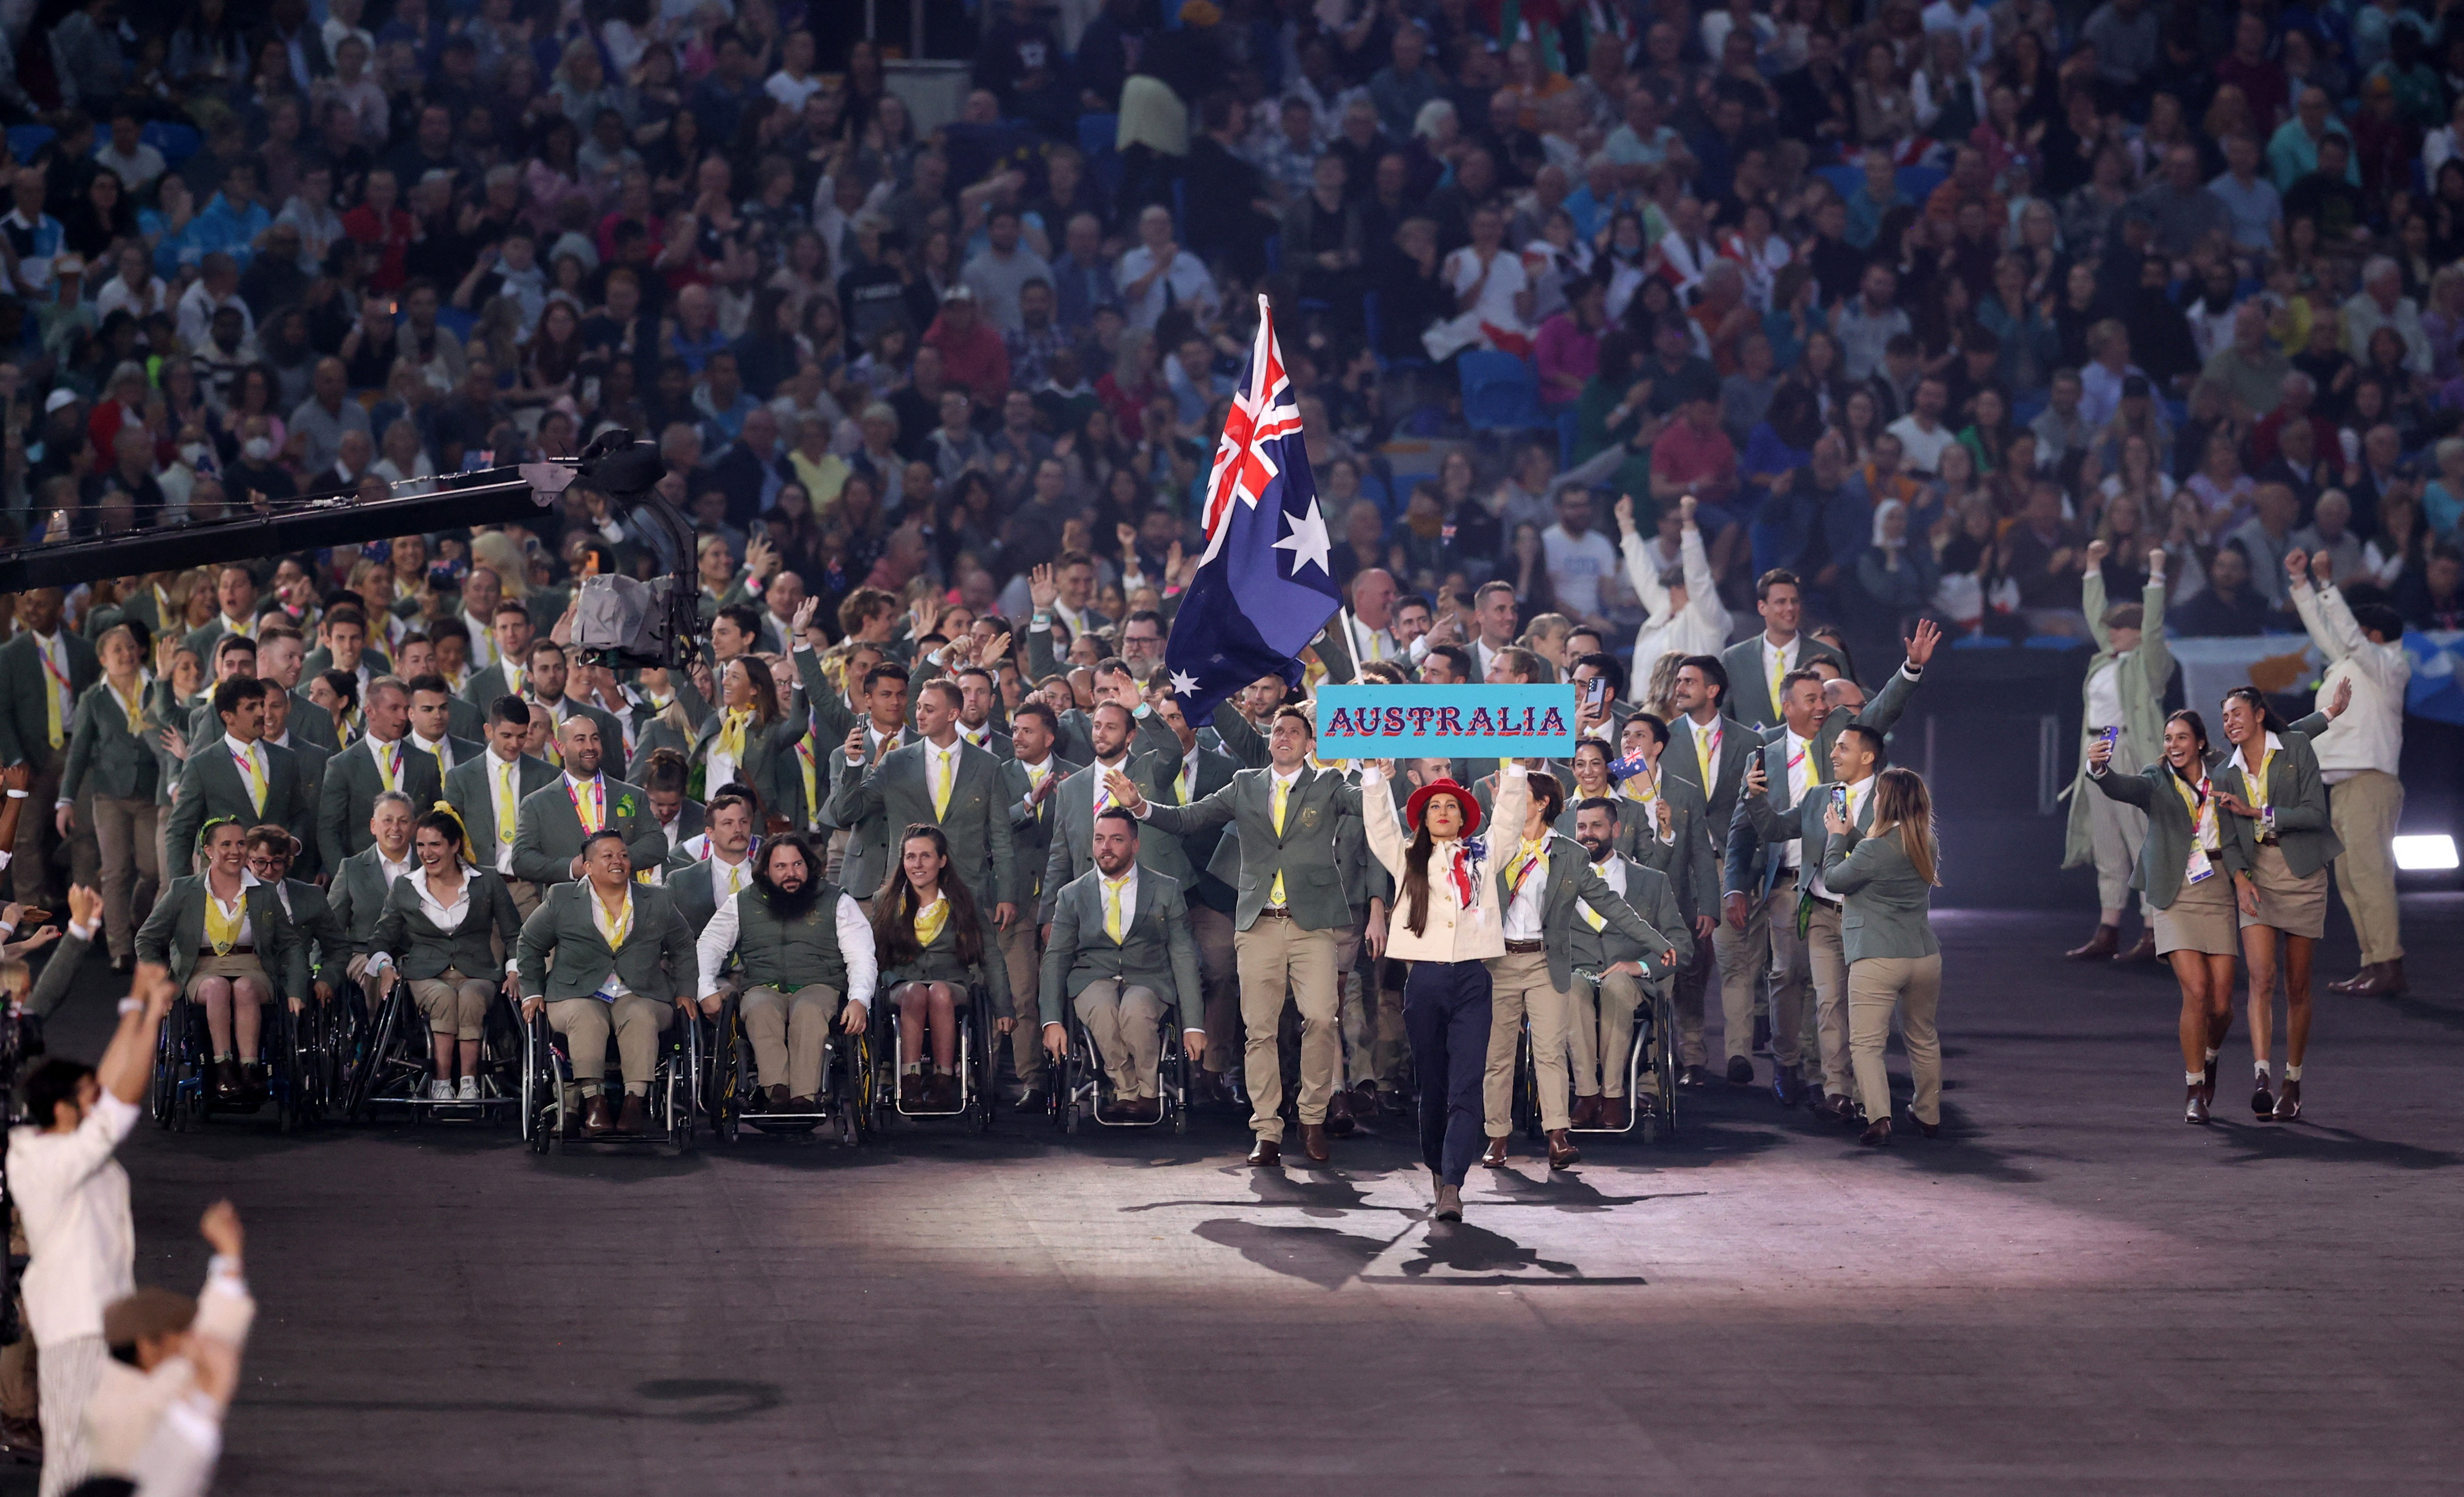 Commonwealth Games - Opening Ceremony